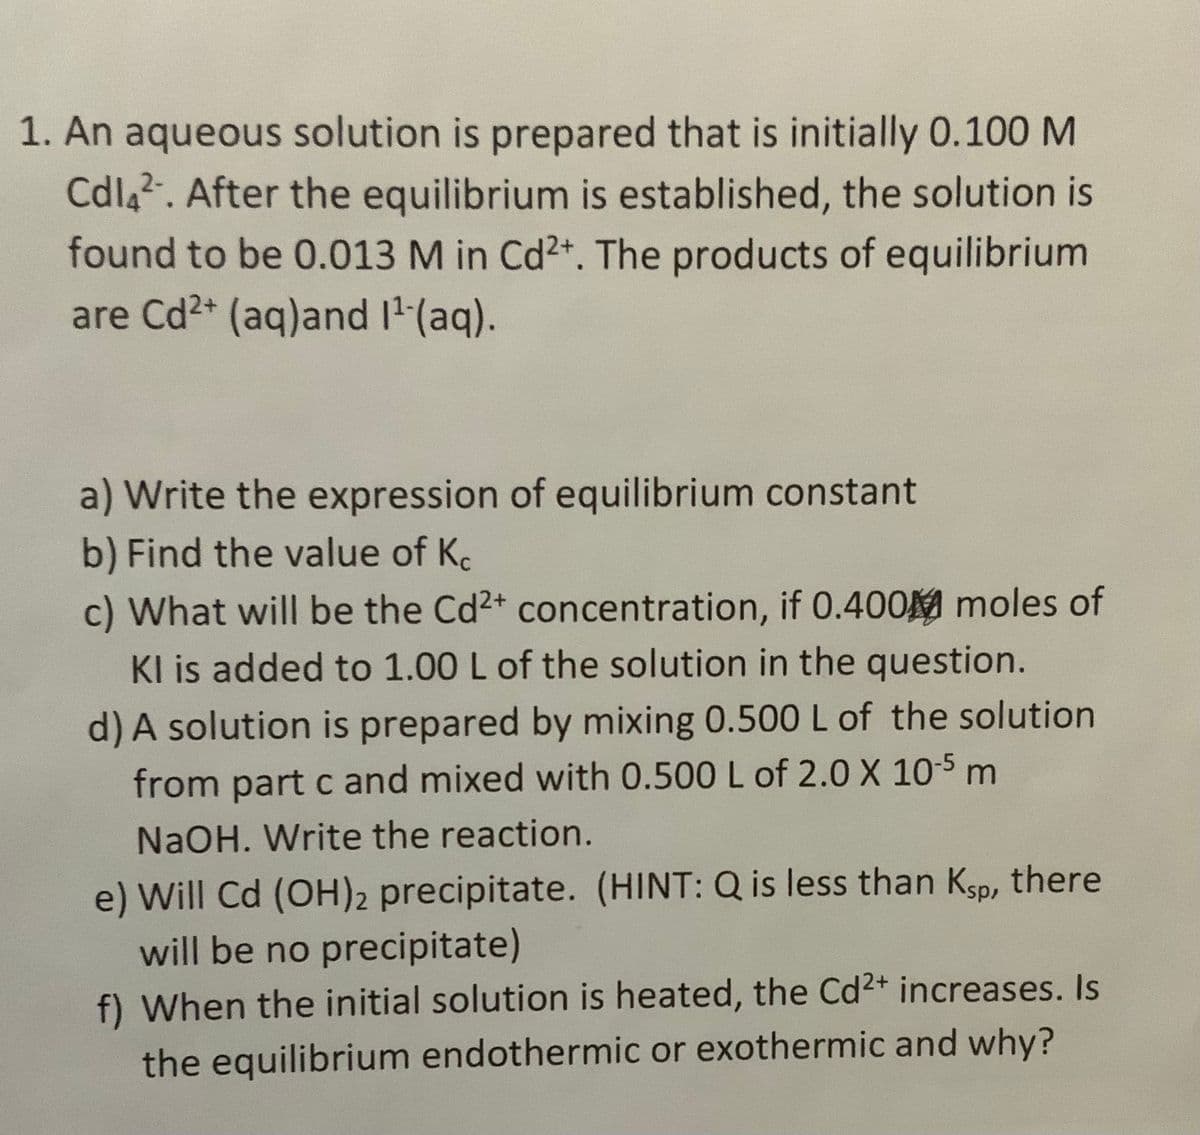 1. An aqueous solution is prepared that is initially 0.100 M
Cdla2. After the equilibrium is established, the solution is
found to be 0.013 M in Cd2+. The products of equilibrium
are Cd2+ (aq)and I' (aq).
a) Write the expression of equilibrium constant
b) Find the value of Ke
c) What will be the Cd2+ concentration, if 0.400M moles of
KI is added to 1.00 L of the solution in the question.
d) A solution is prepared by mixing 0.500 L of the solution
from part c and mixed with 0.500 L of 2.0 X 10-5 m
NaOH. Write the reaction.
e) Will Cd (OH)2 precipitate. (HINT: Q is less than Ksp, there
will be no precipitate)
f) When the initial solution is heated, the Cd2+ increases. Is
the equilibrium endothermic or exothermic and why?
